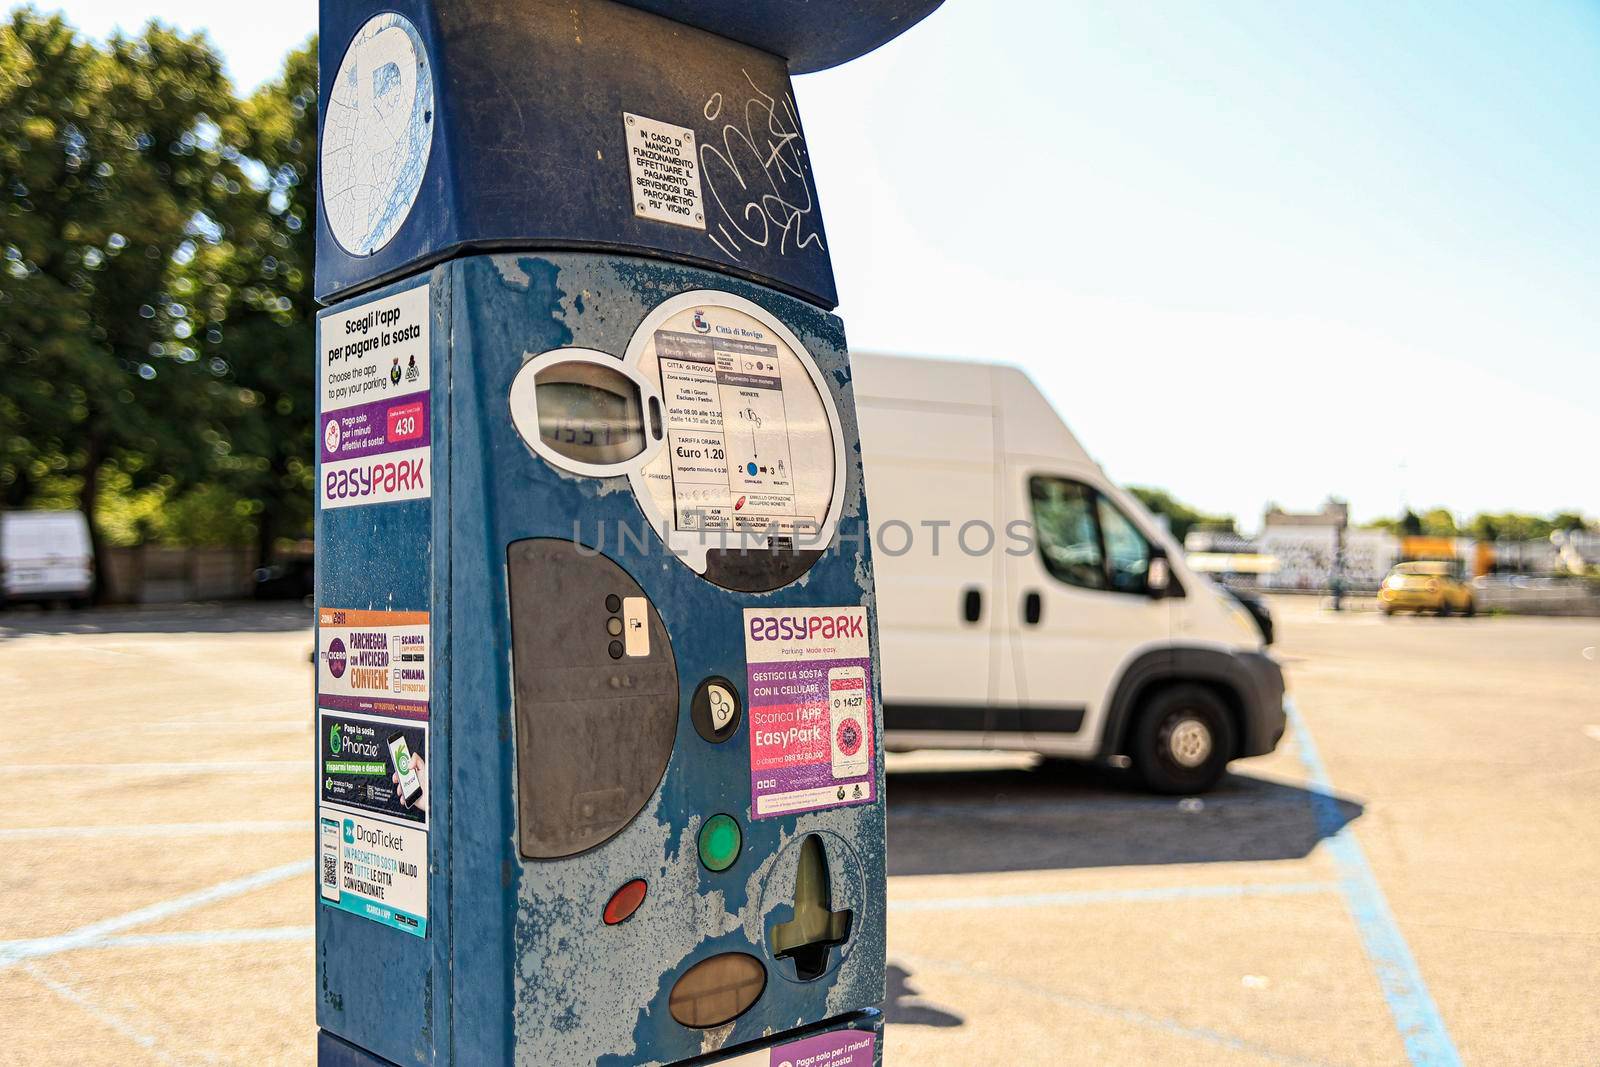 Parking meter for paid parking by pippocarlot